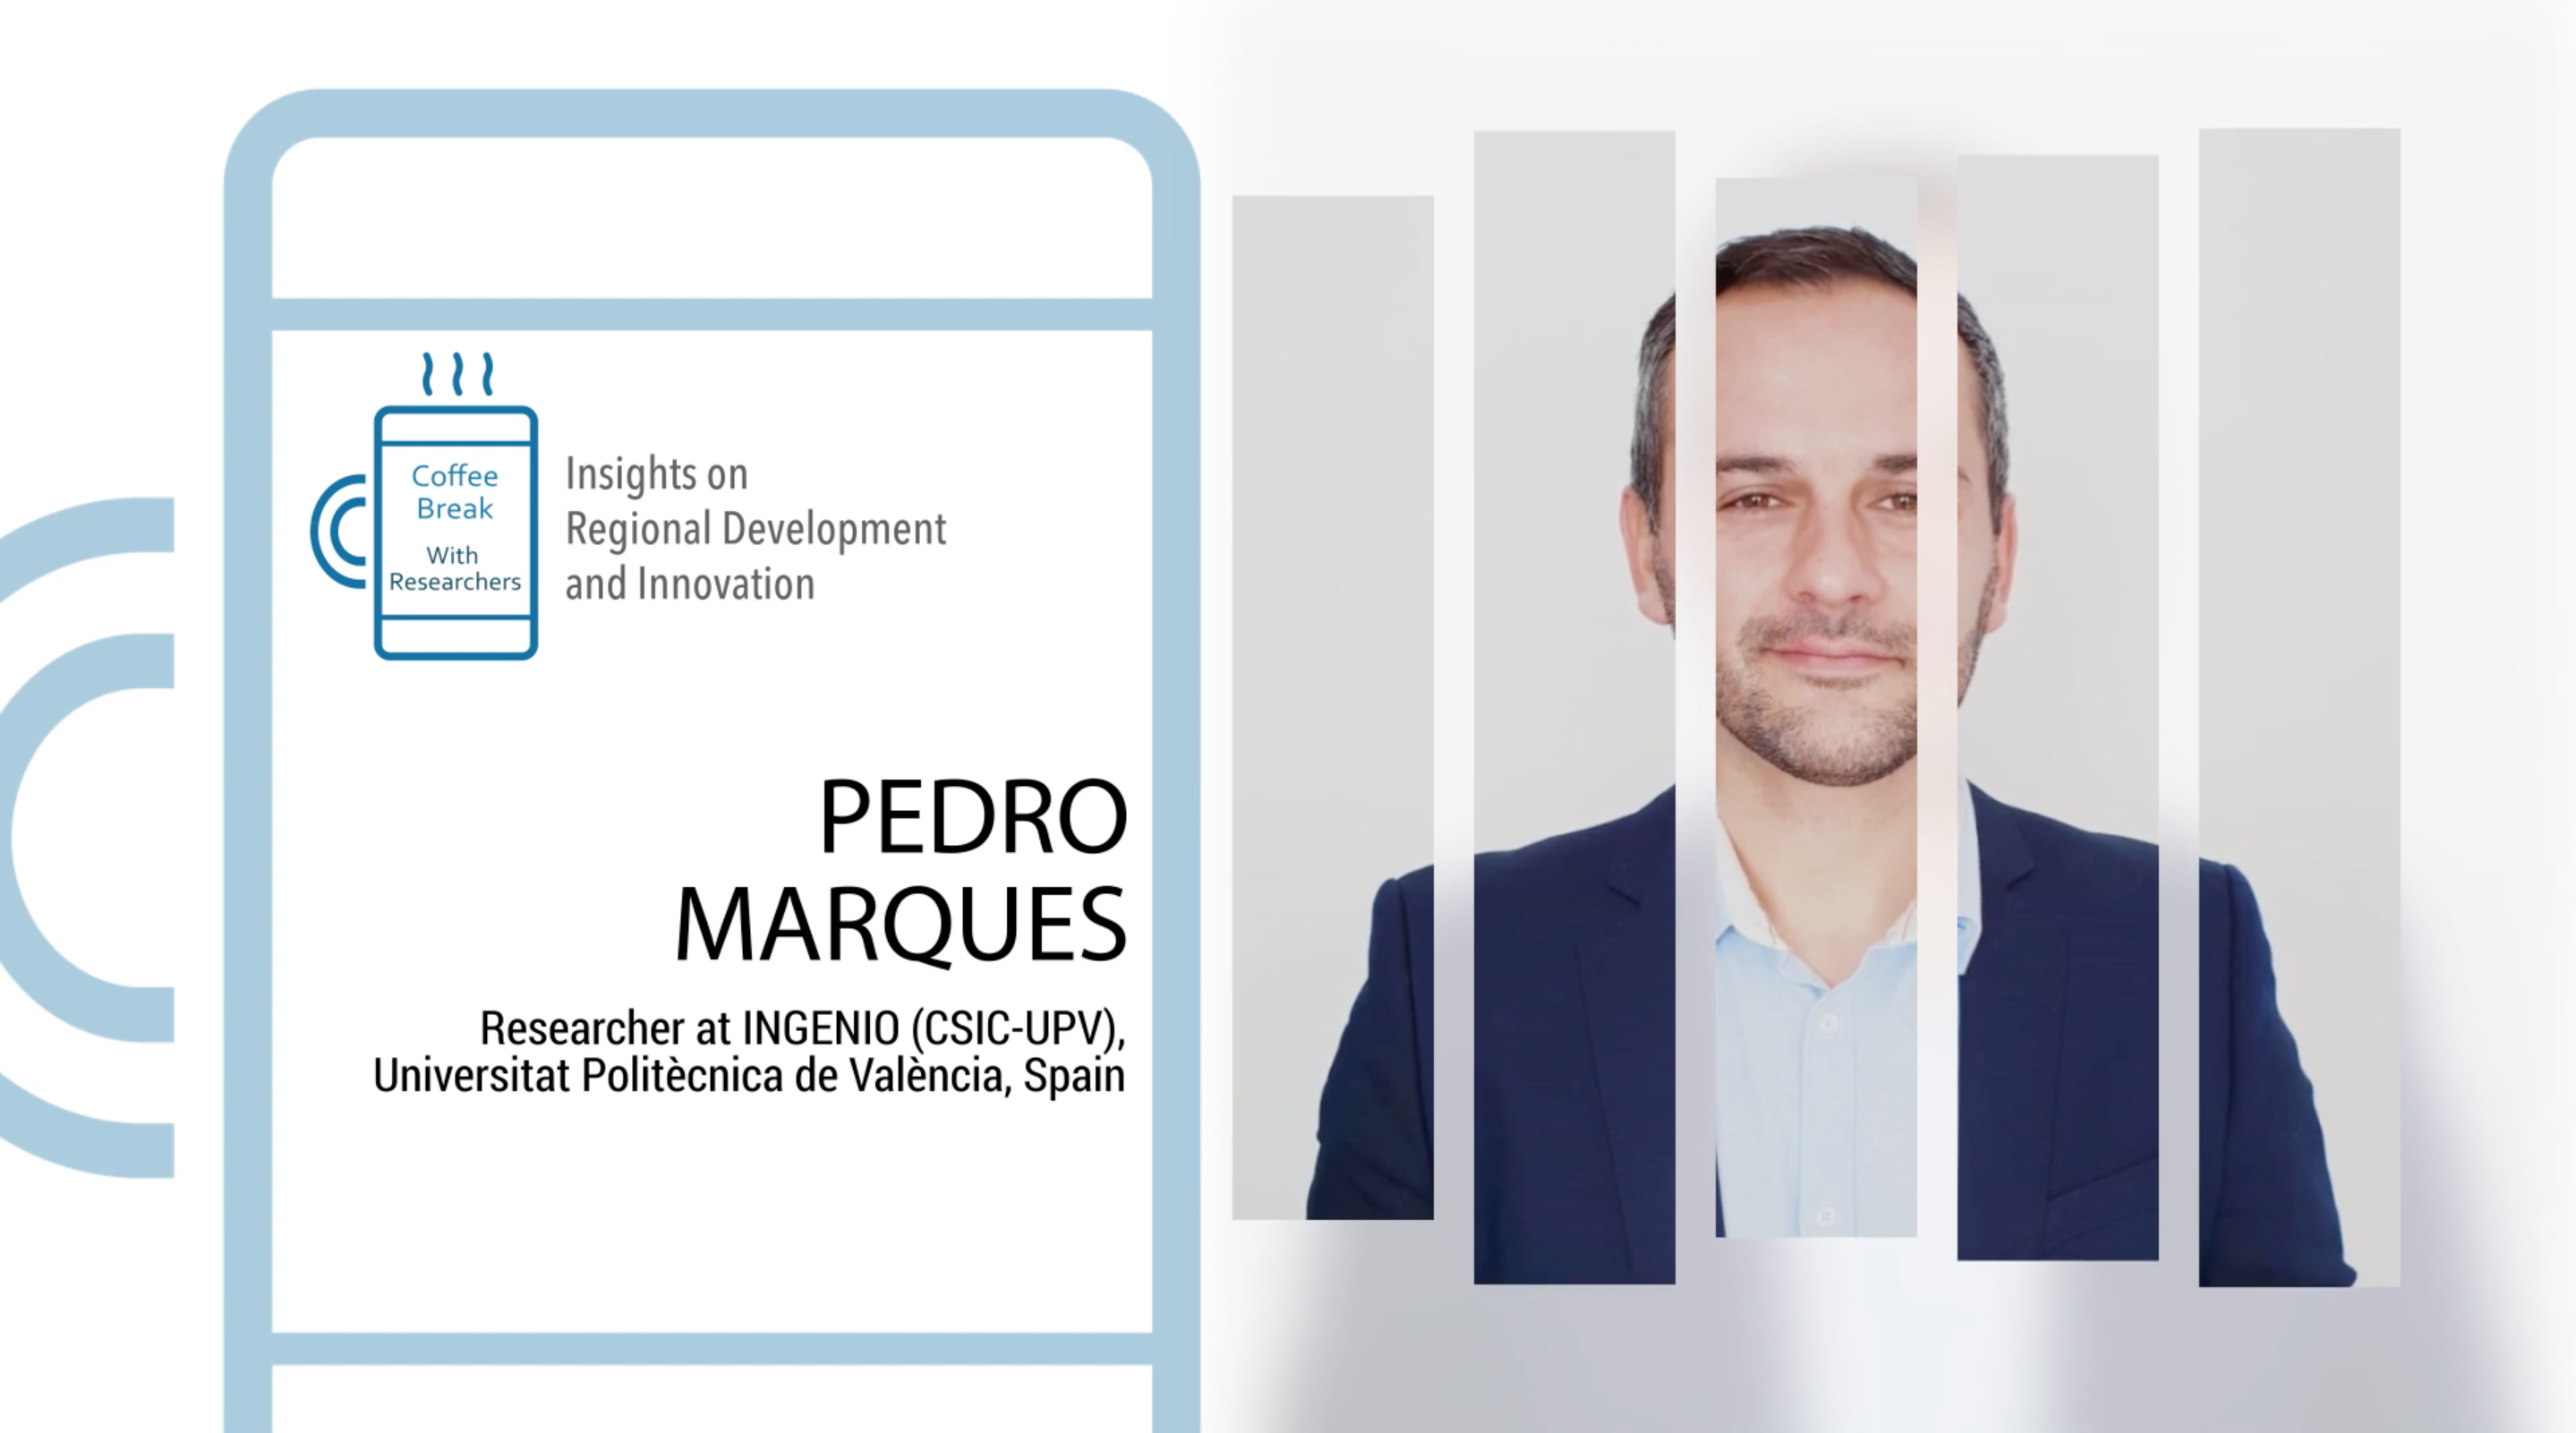 Pedro Marques: Spaces of novelty